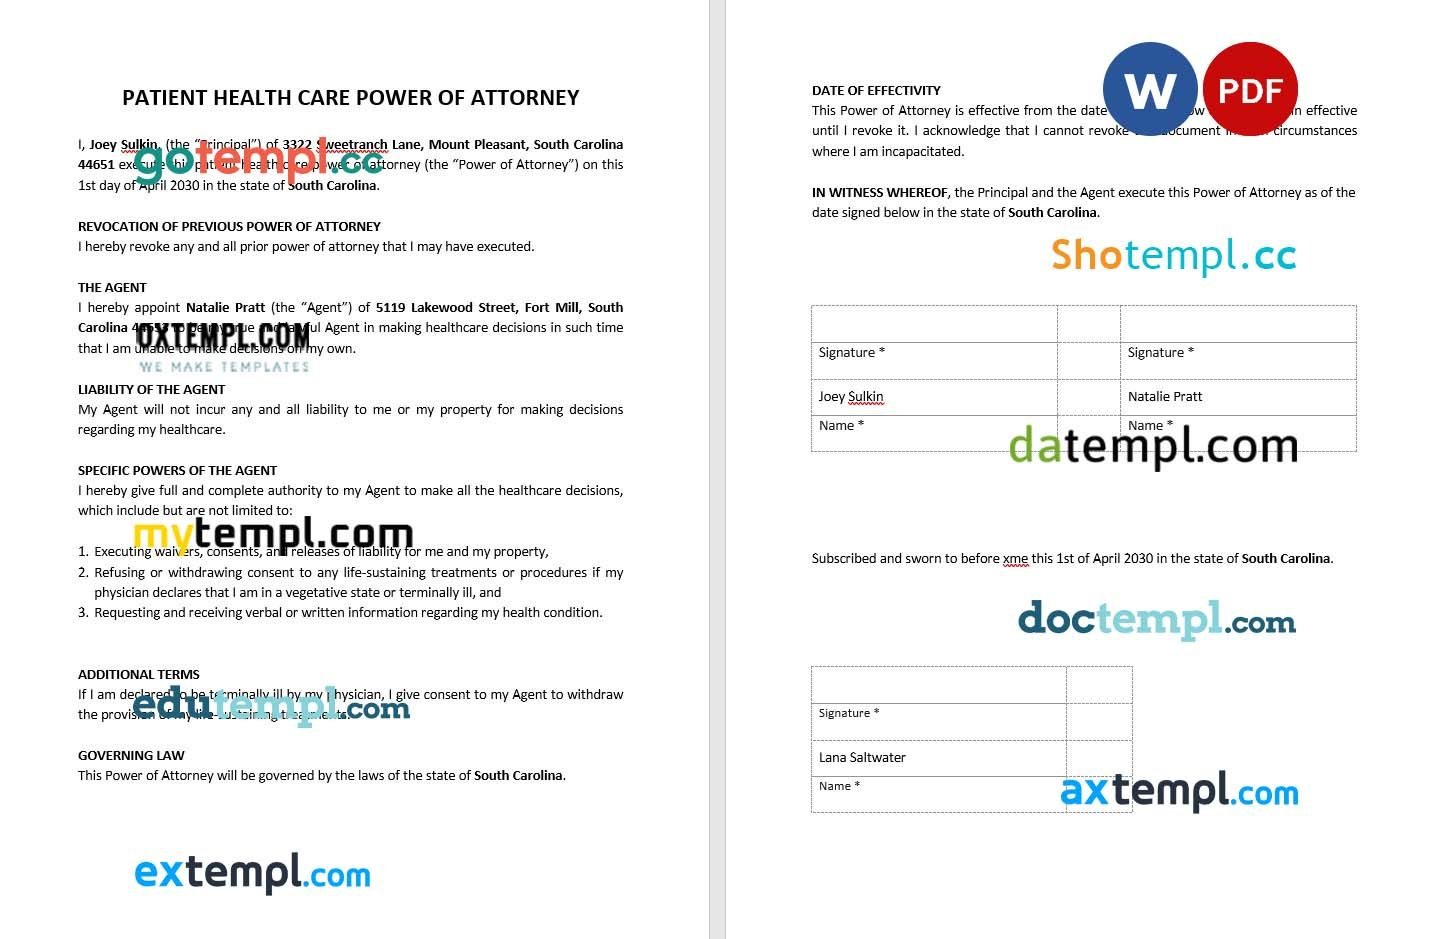 Patient Health Care Power of Attorney example, fully editable